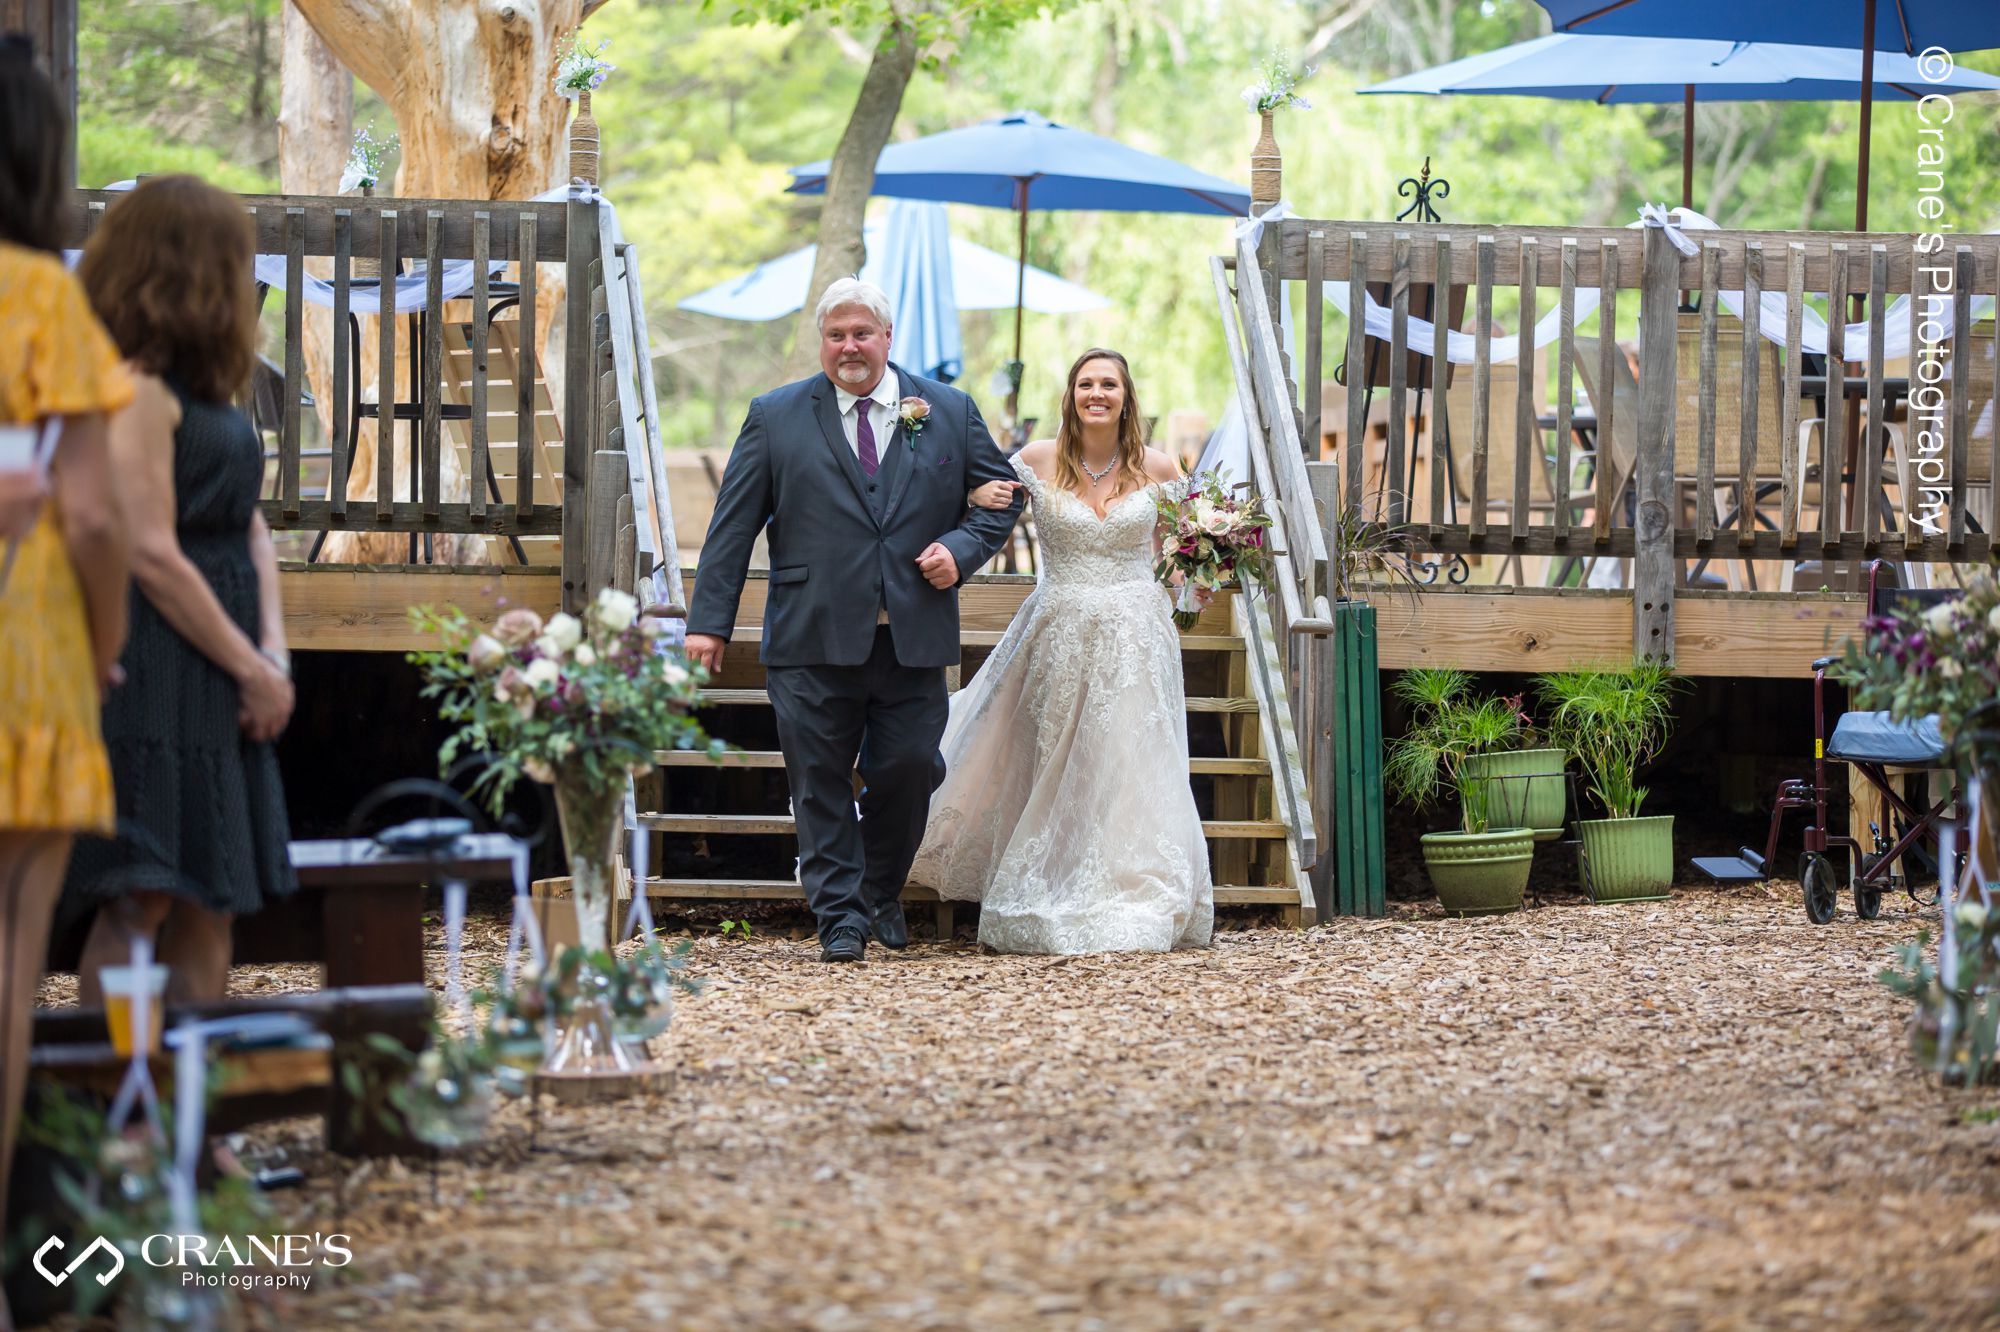 A bride walks down the aisle with her dad during an outdoor wedding ceremony at The Swan Barn Door